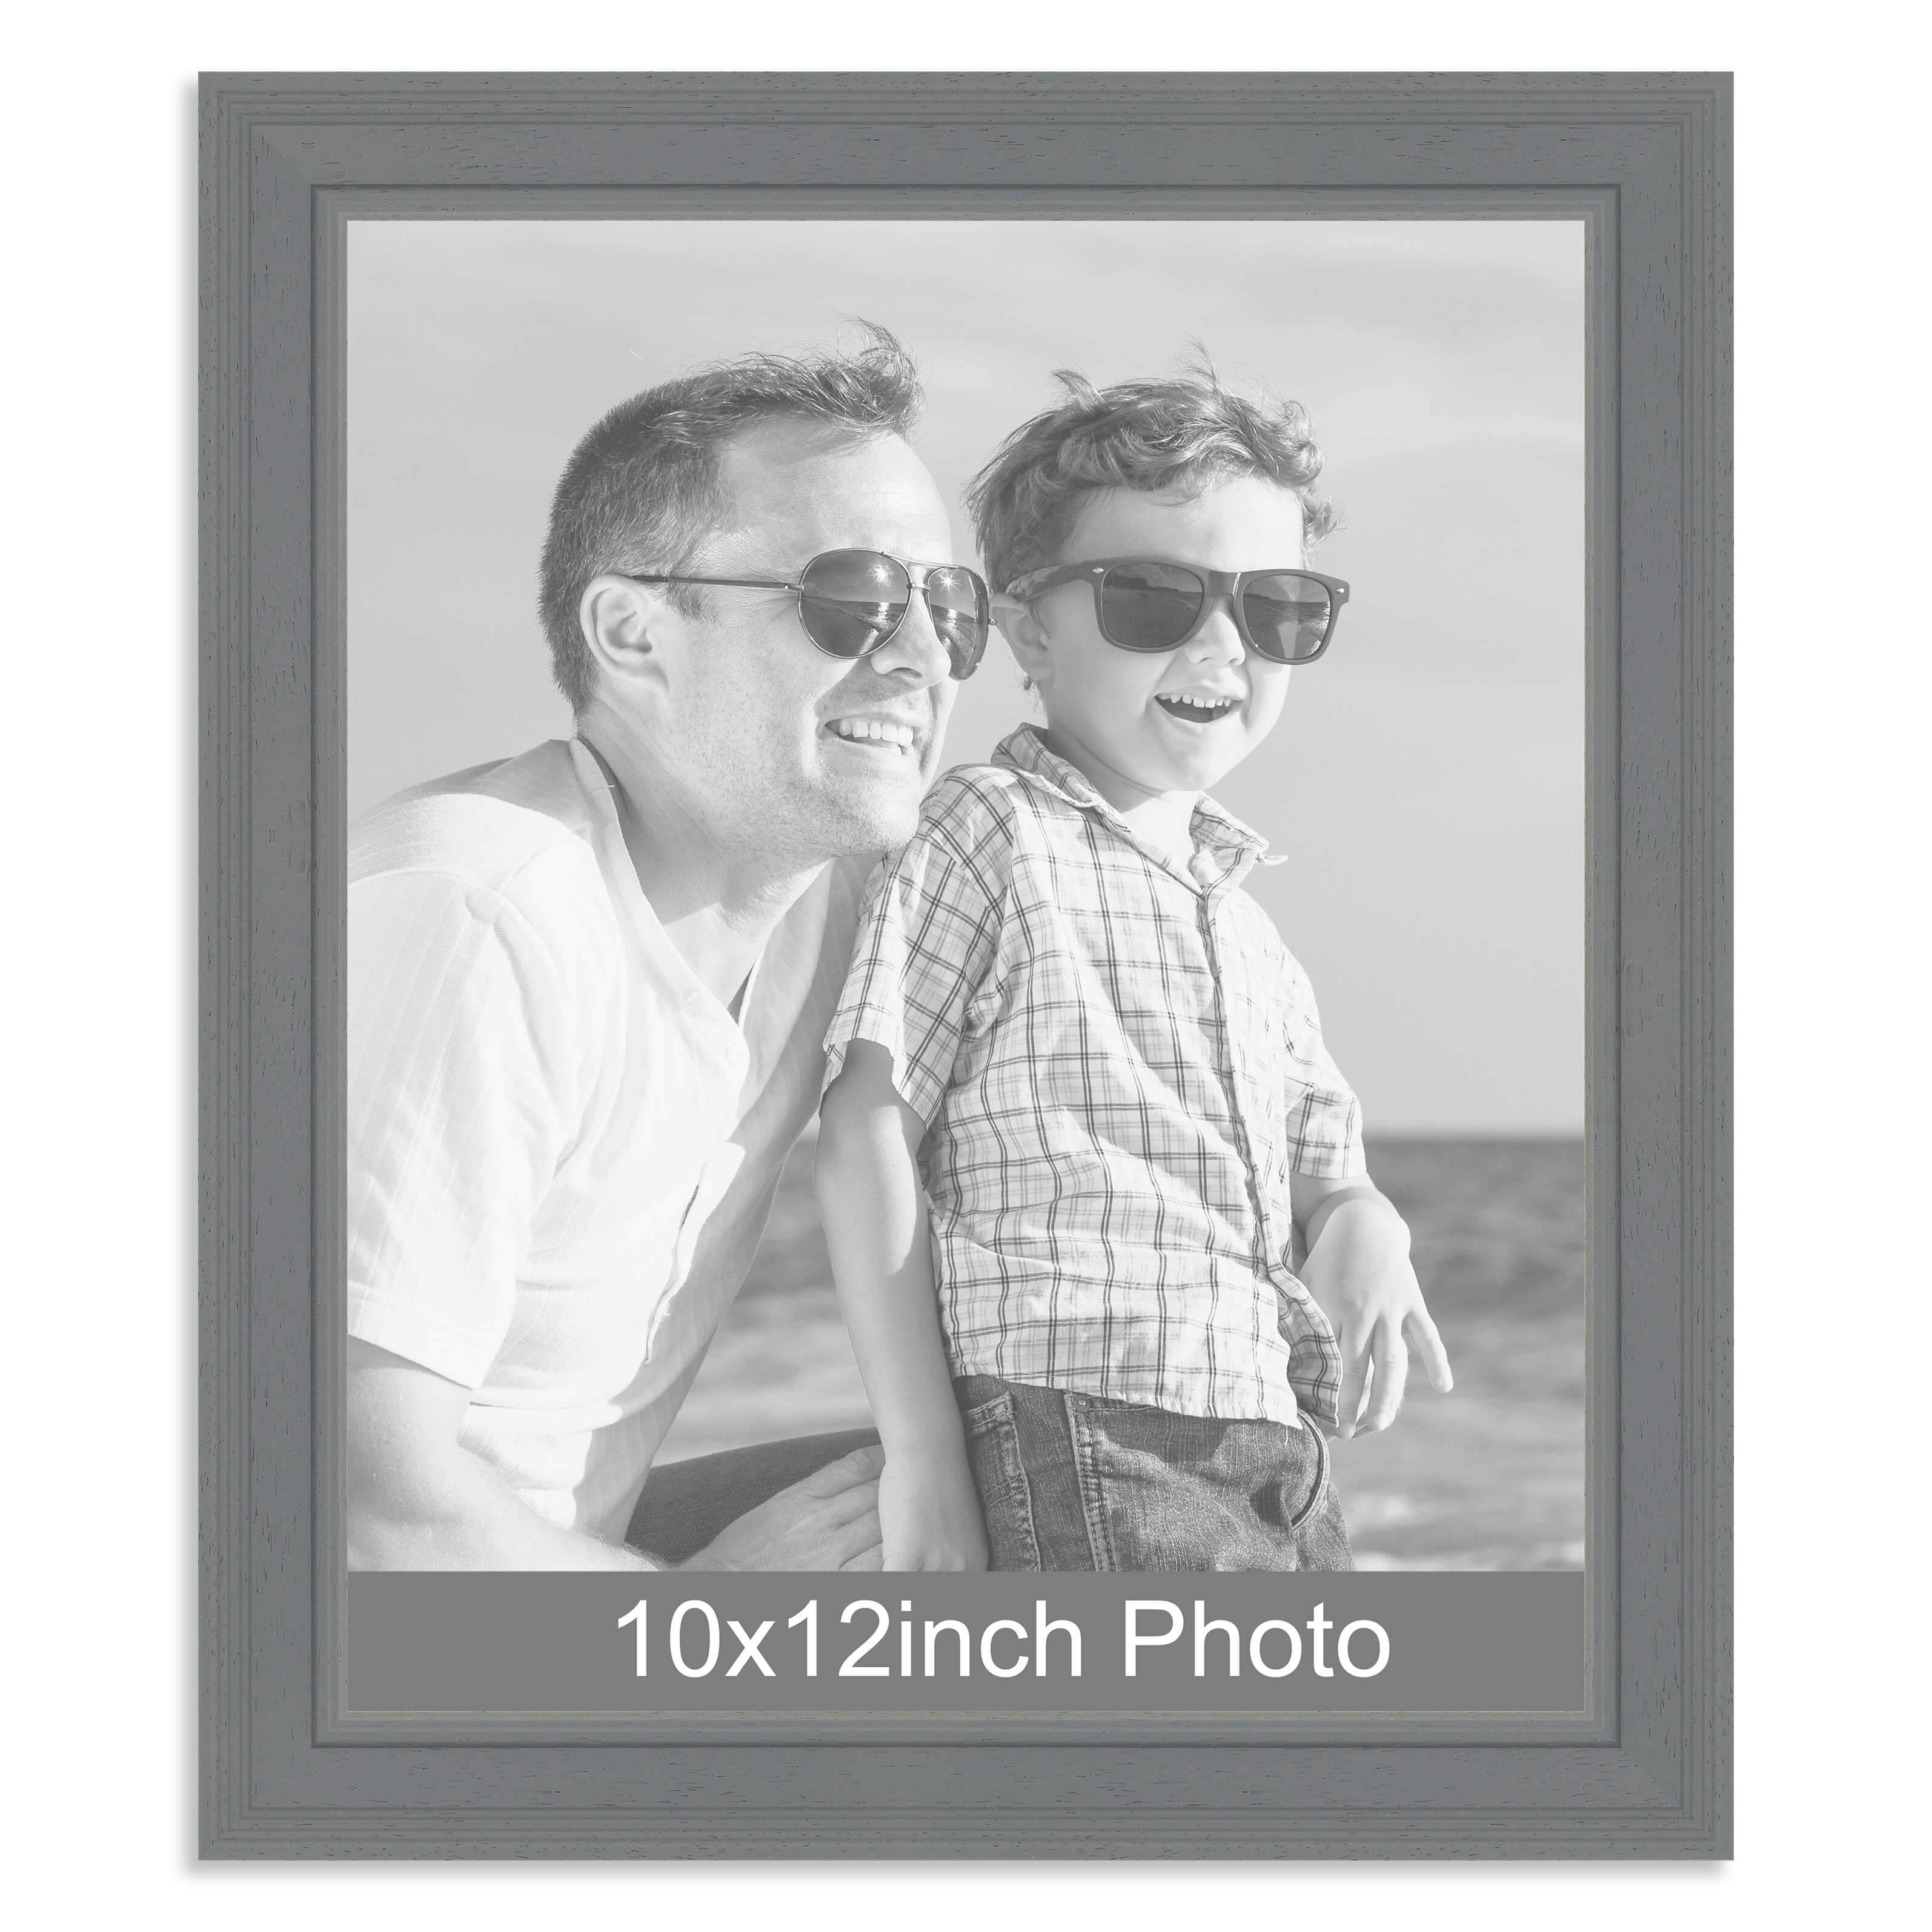 10 x 12inch Grey Wooden Photo Frame for a 10×12/12x10in photo